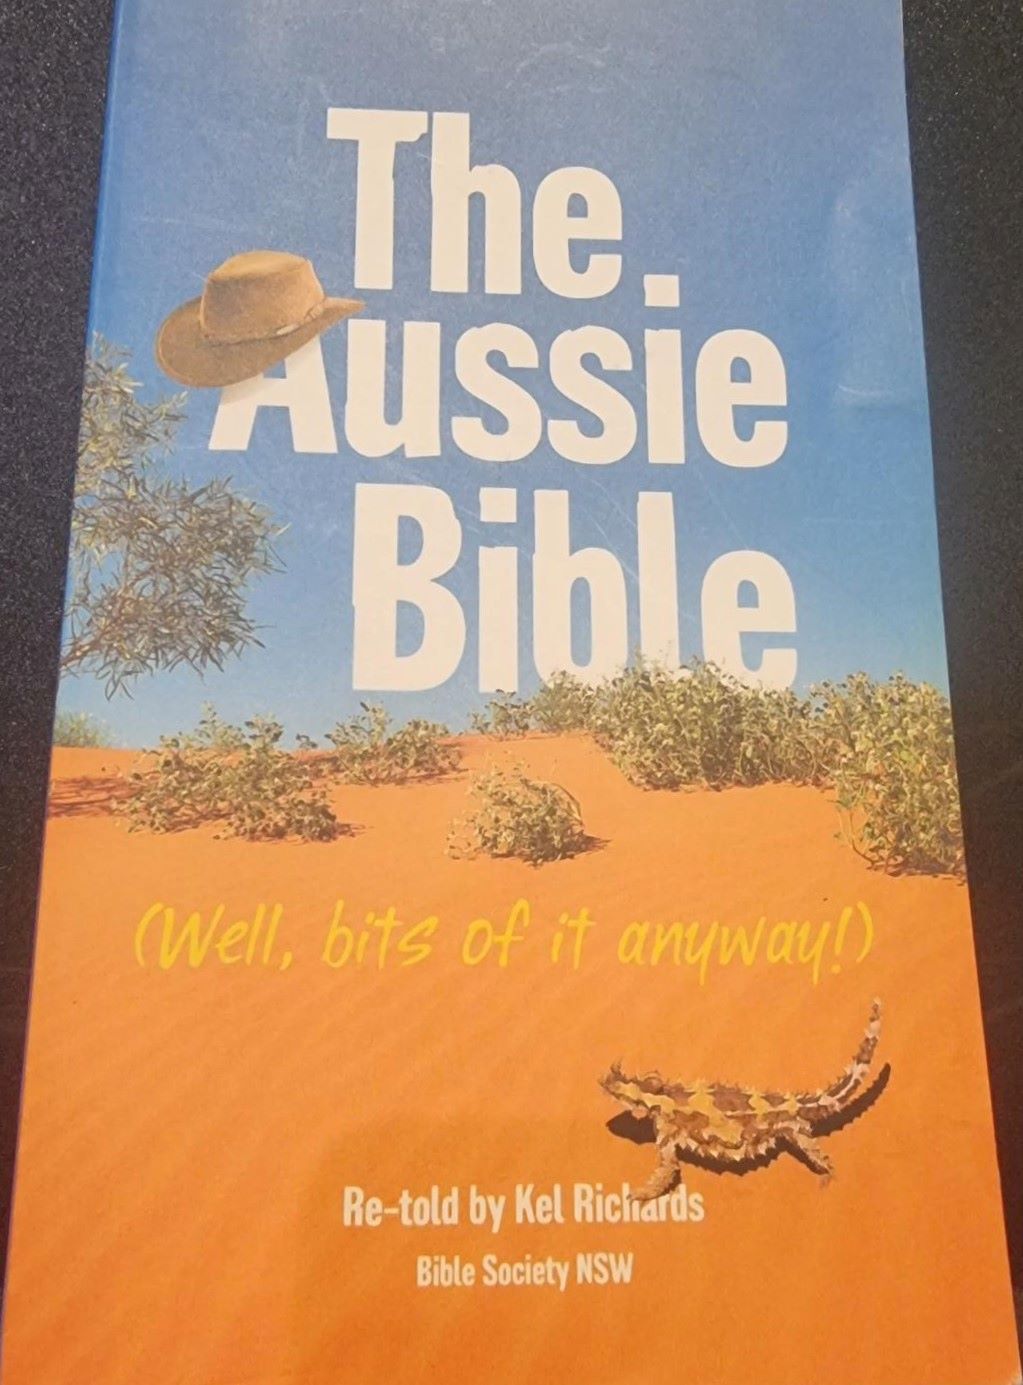 The Aussie Bible- Well, bits of it anyway!